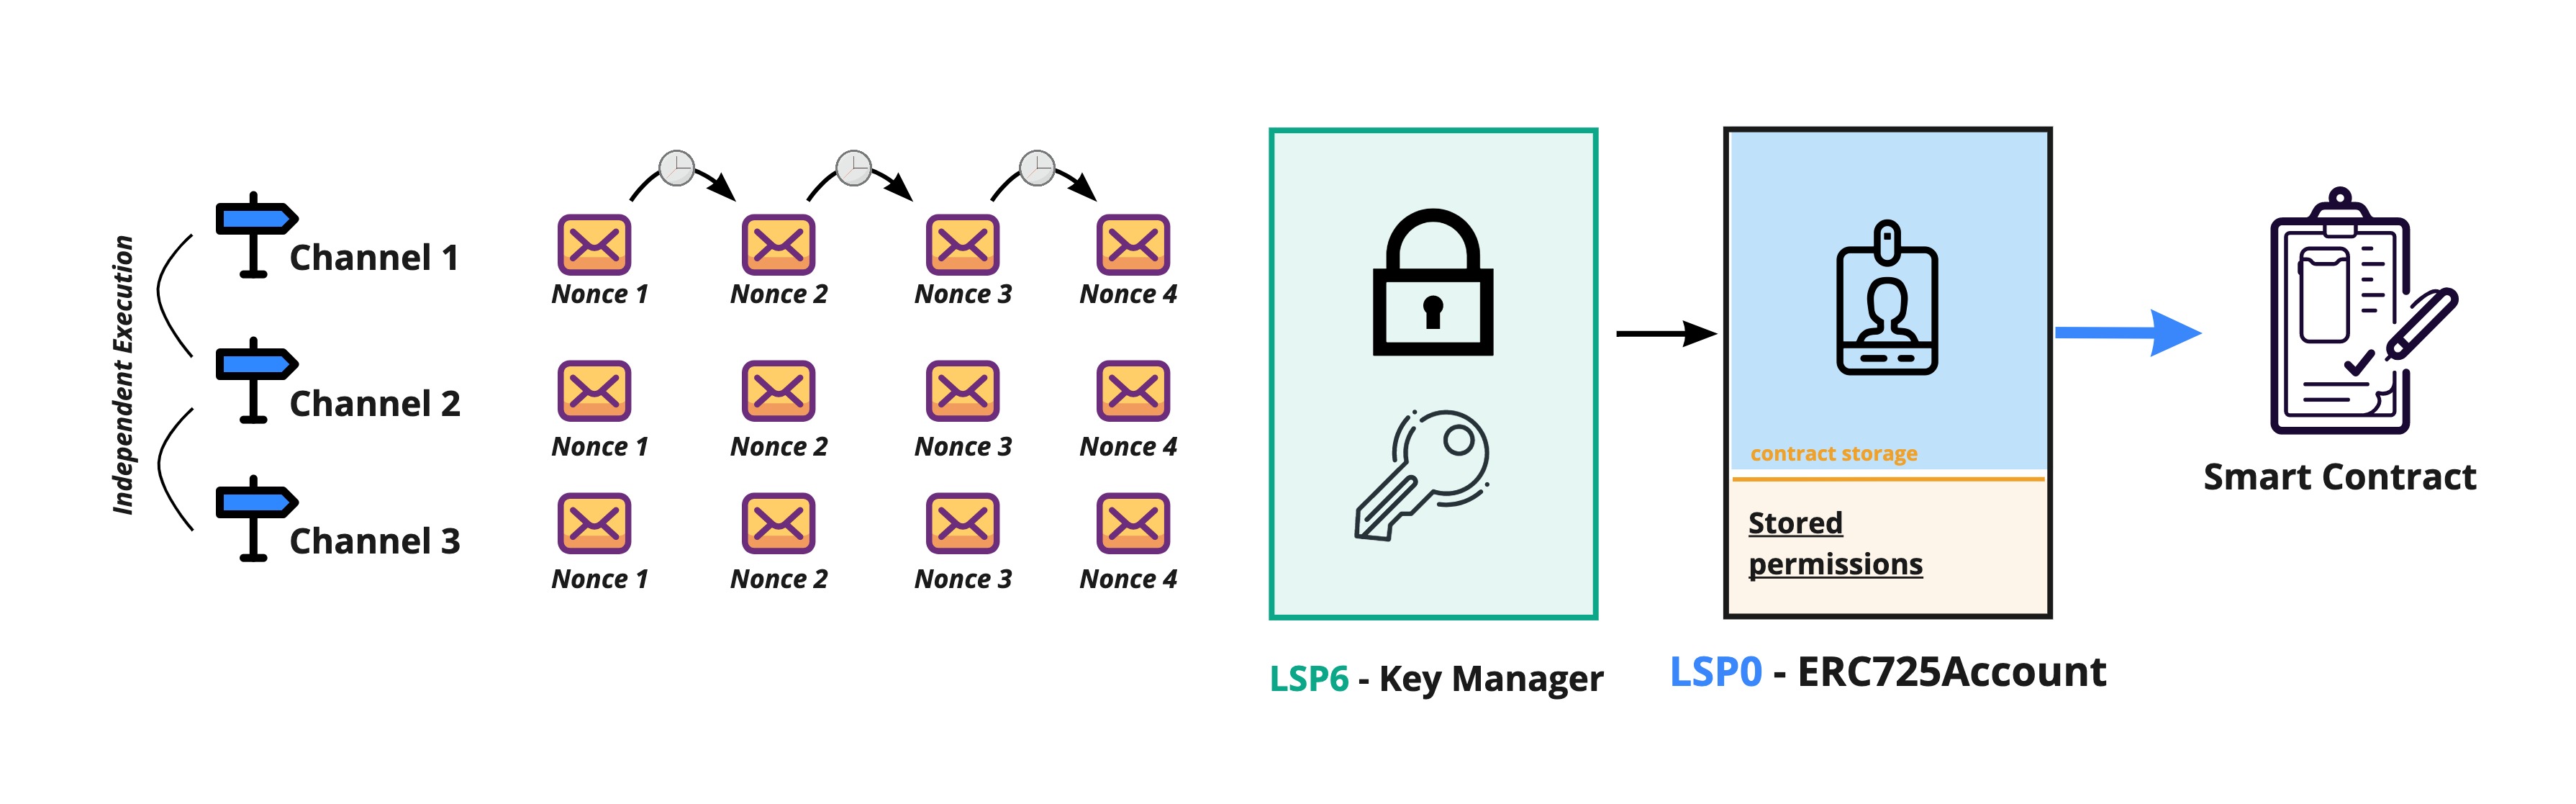 LSP6 Key Manager Relay Service